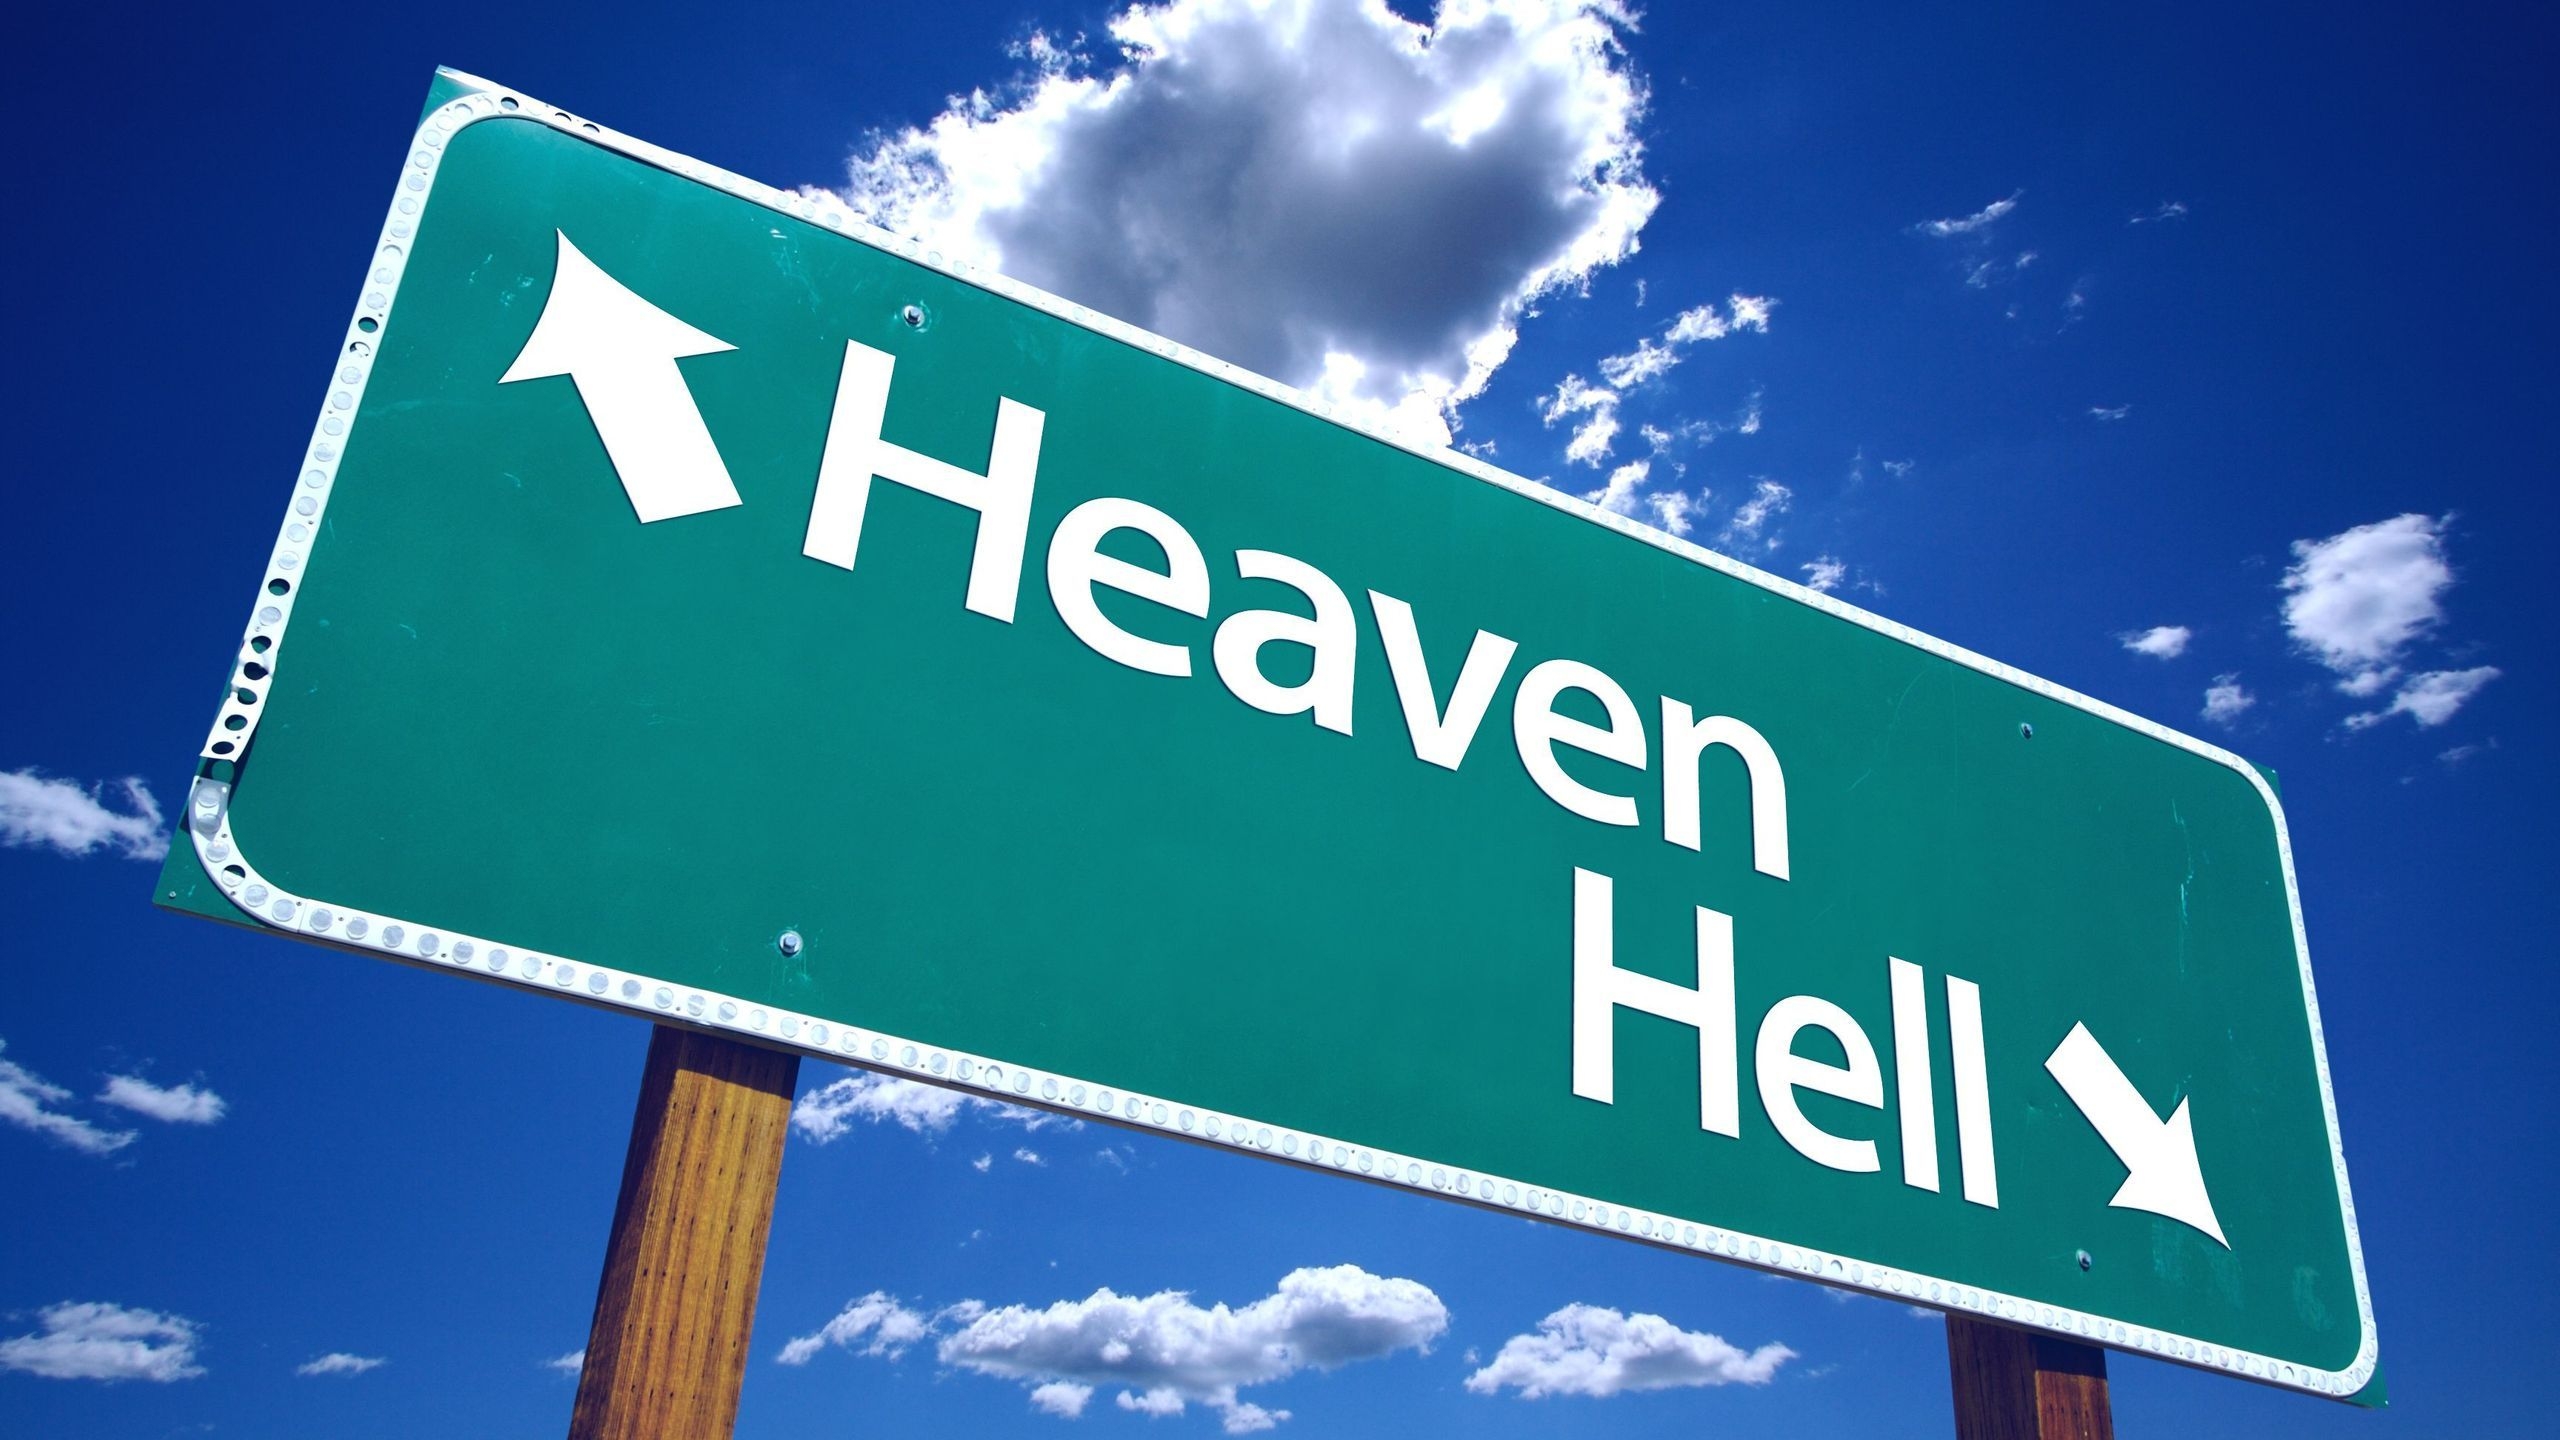 Heaven or Hell for 2560x1440 HDTV resolution